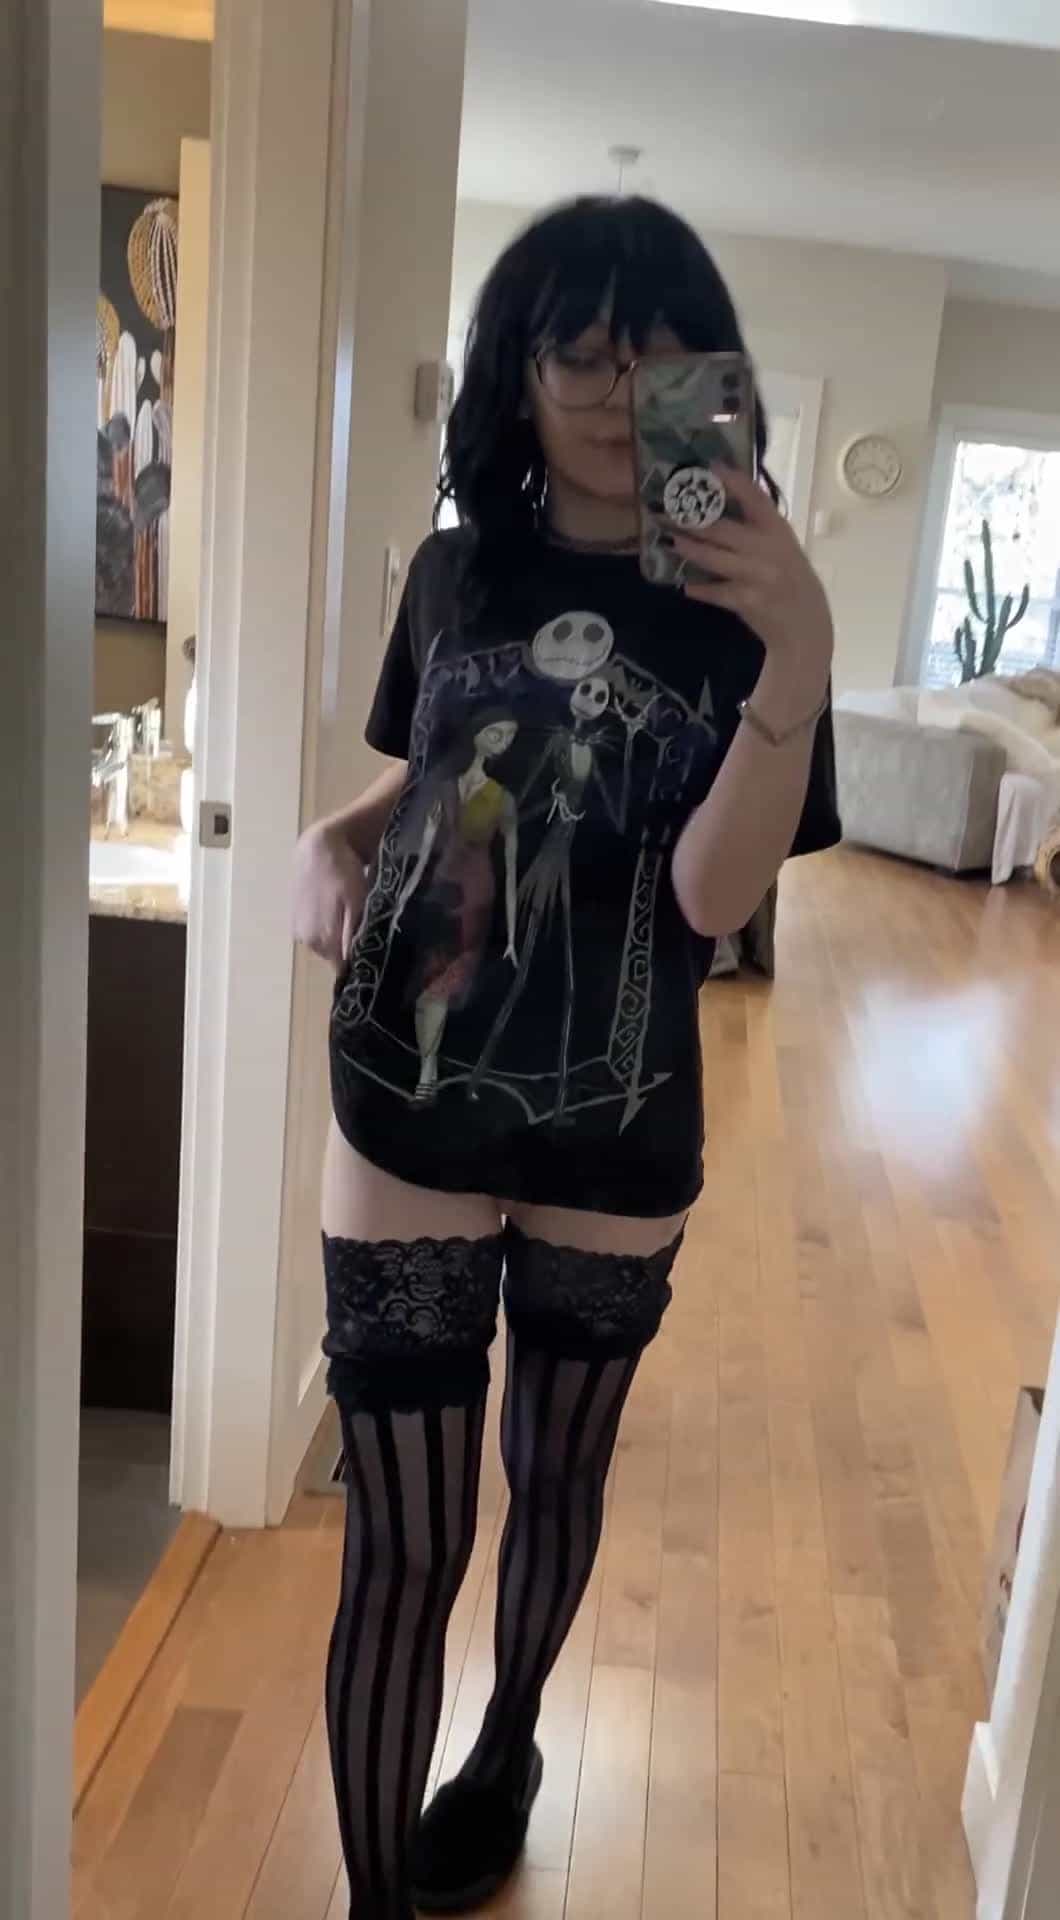 I'm just a fun-sized goth nerd looking for her Pumpkin King 😖 [F]